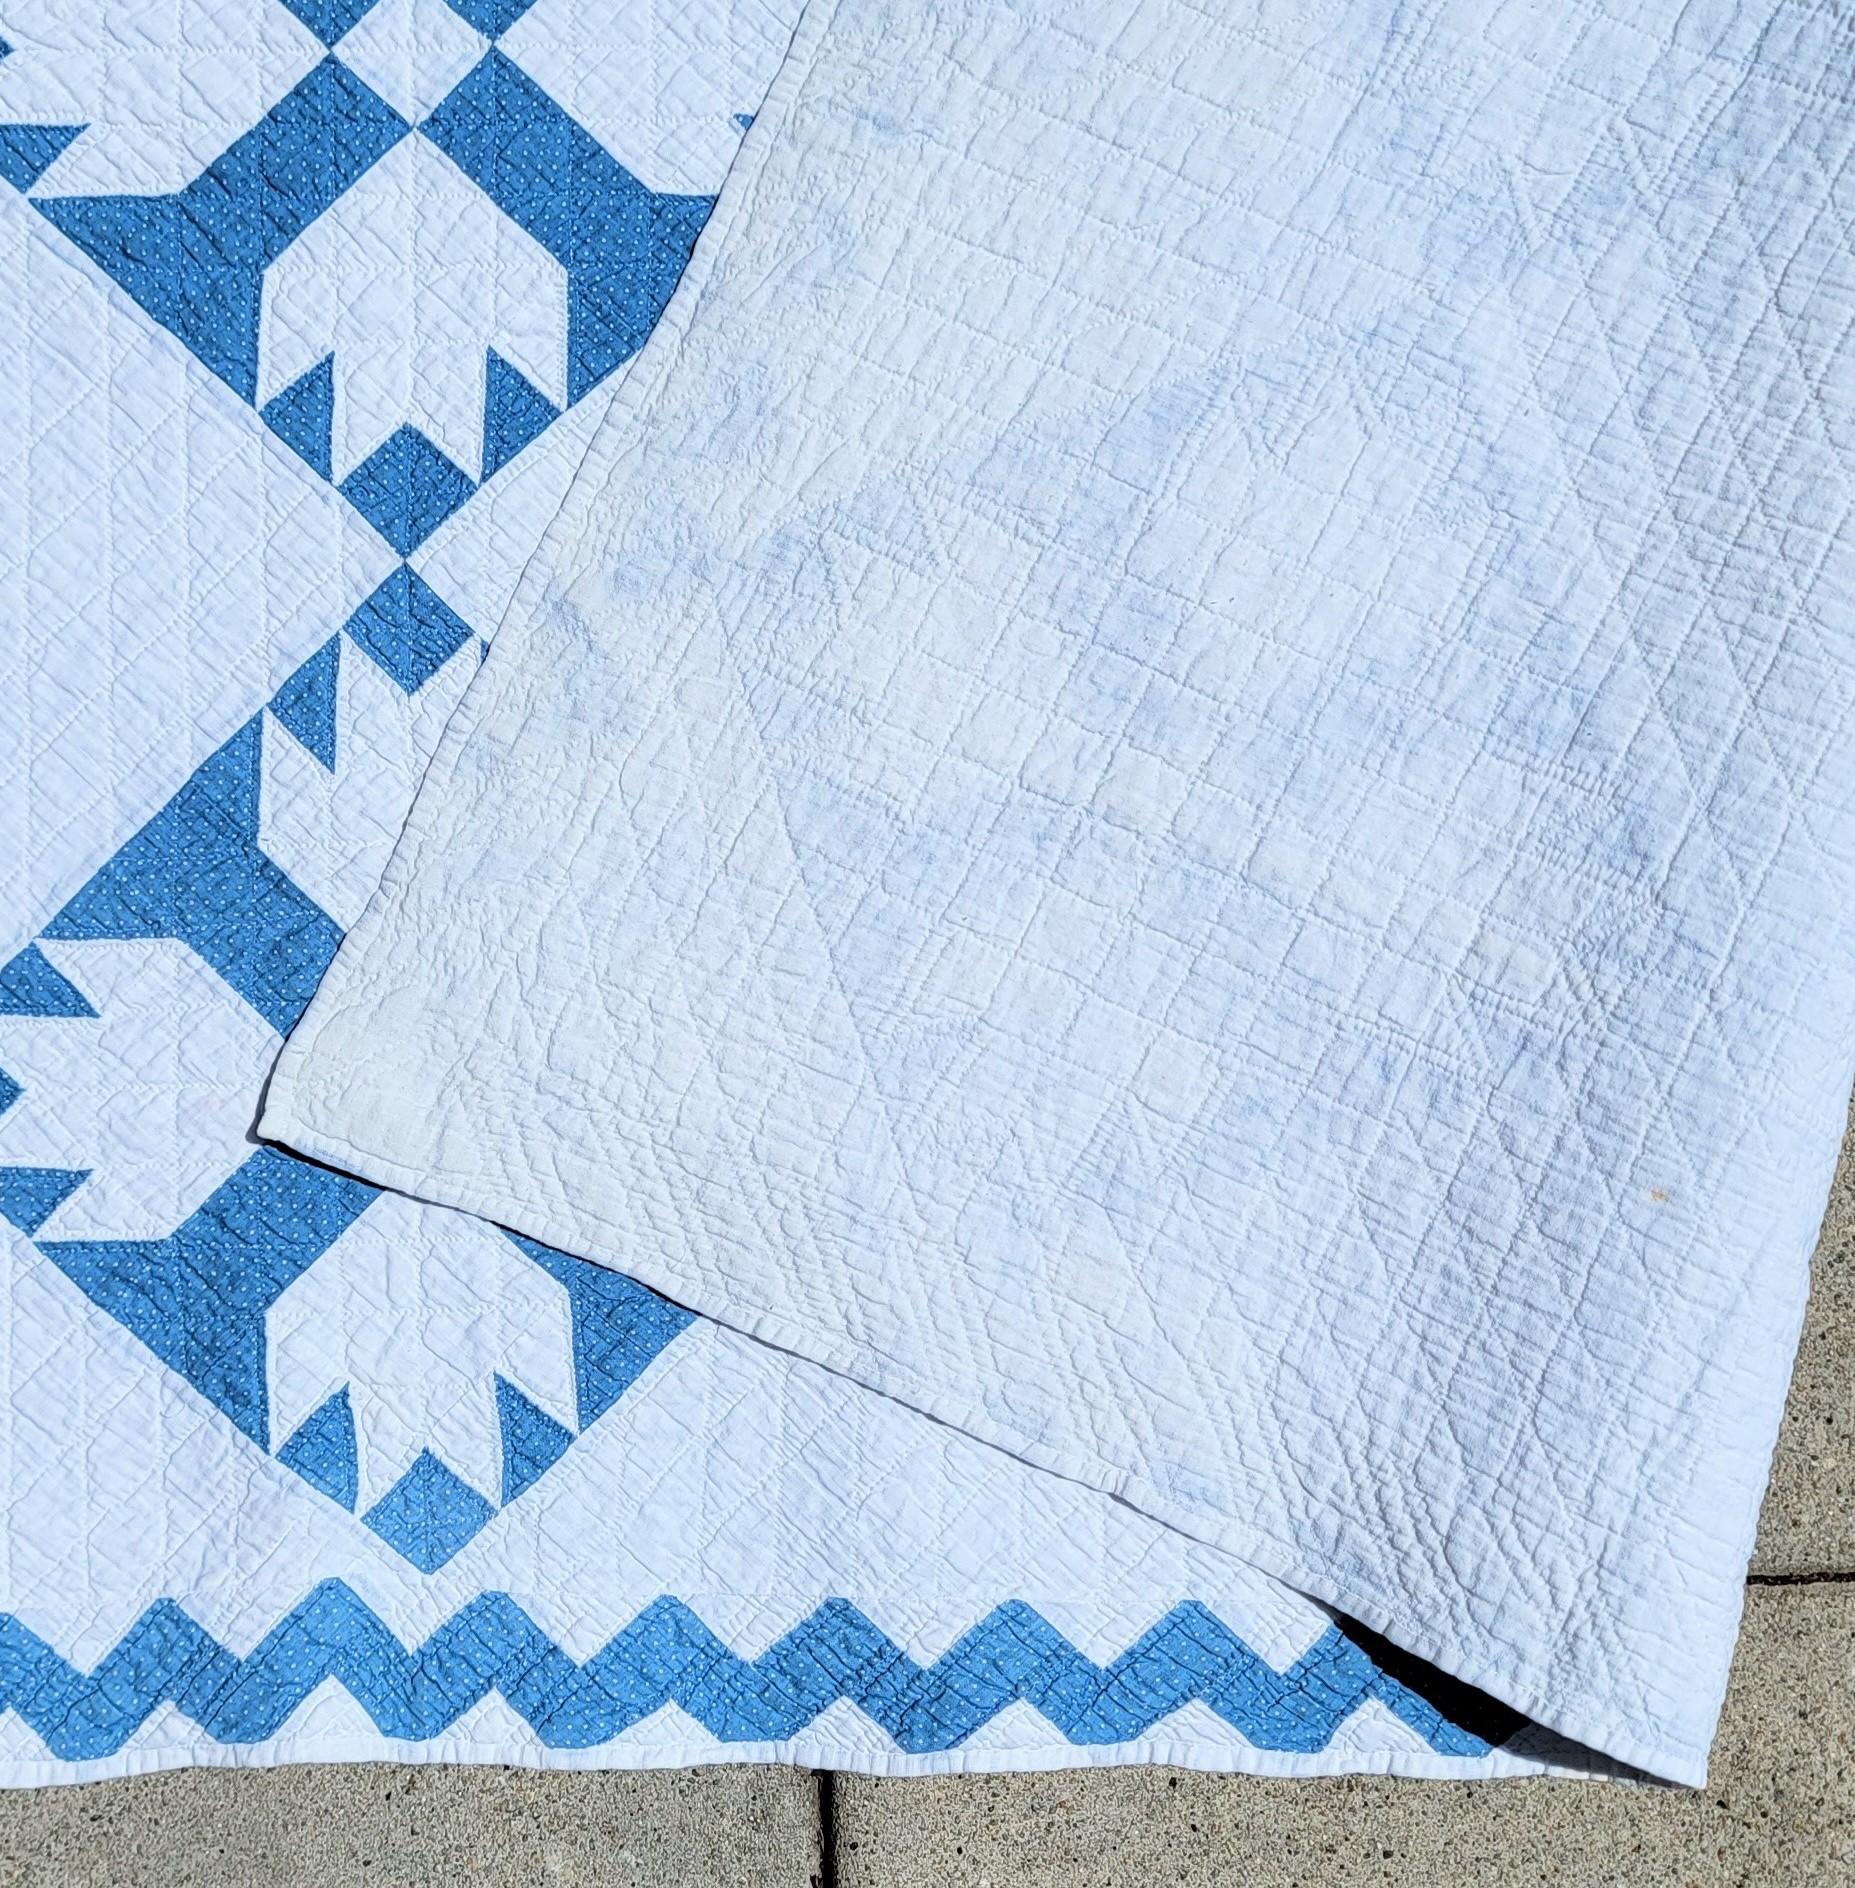 19Thc Early lighter robin egg blue calico quilt with a zig zag border and in fine condition. This fine condition quilt has very fine quilting.